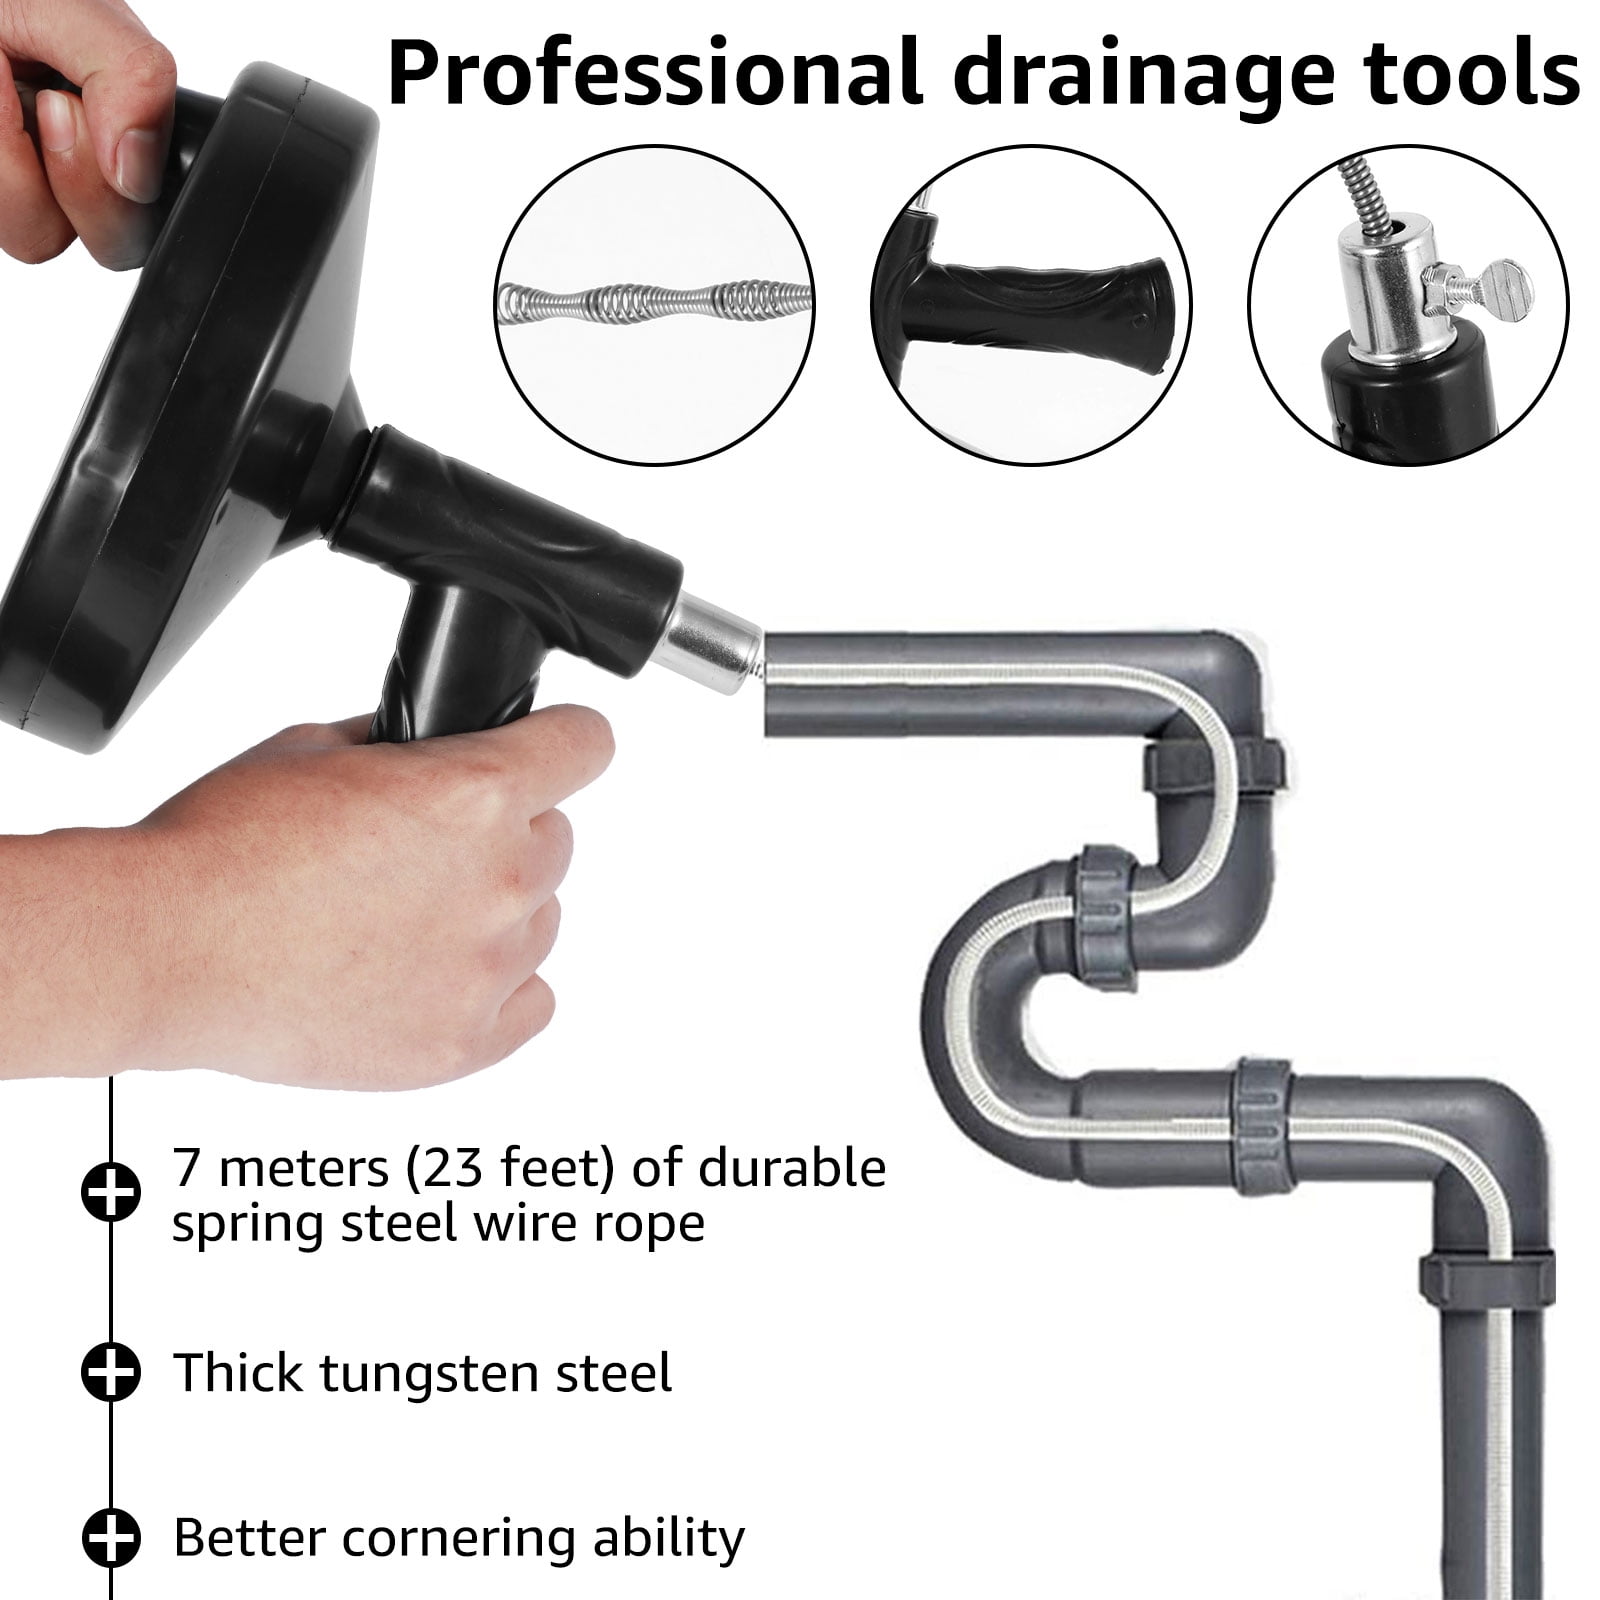 The Plumber's Choice 15- Ft Drill and Manual Drum Auger, Steel Plumbing  Drain Snake with Drain Cleaning Cable to Remove Drain Clogs SU3249 - The  Home Depot